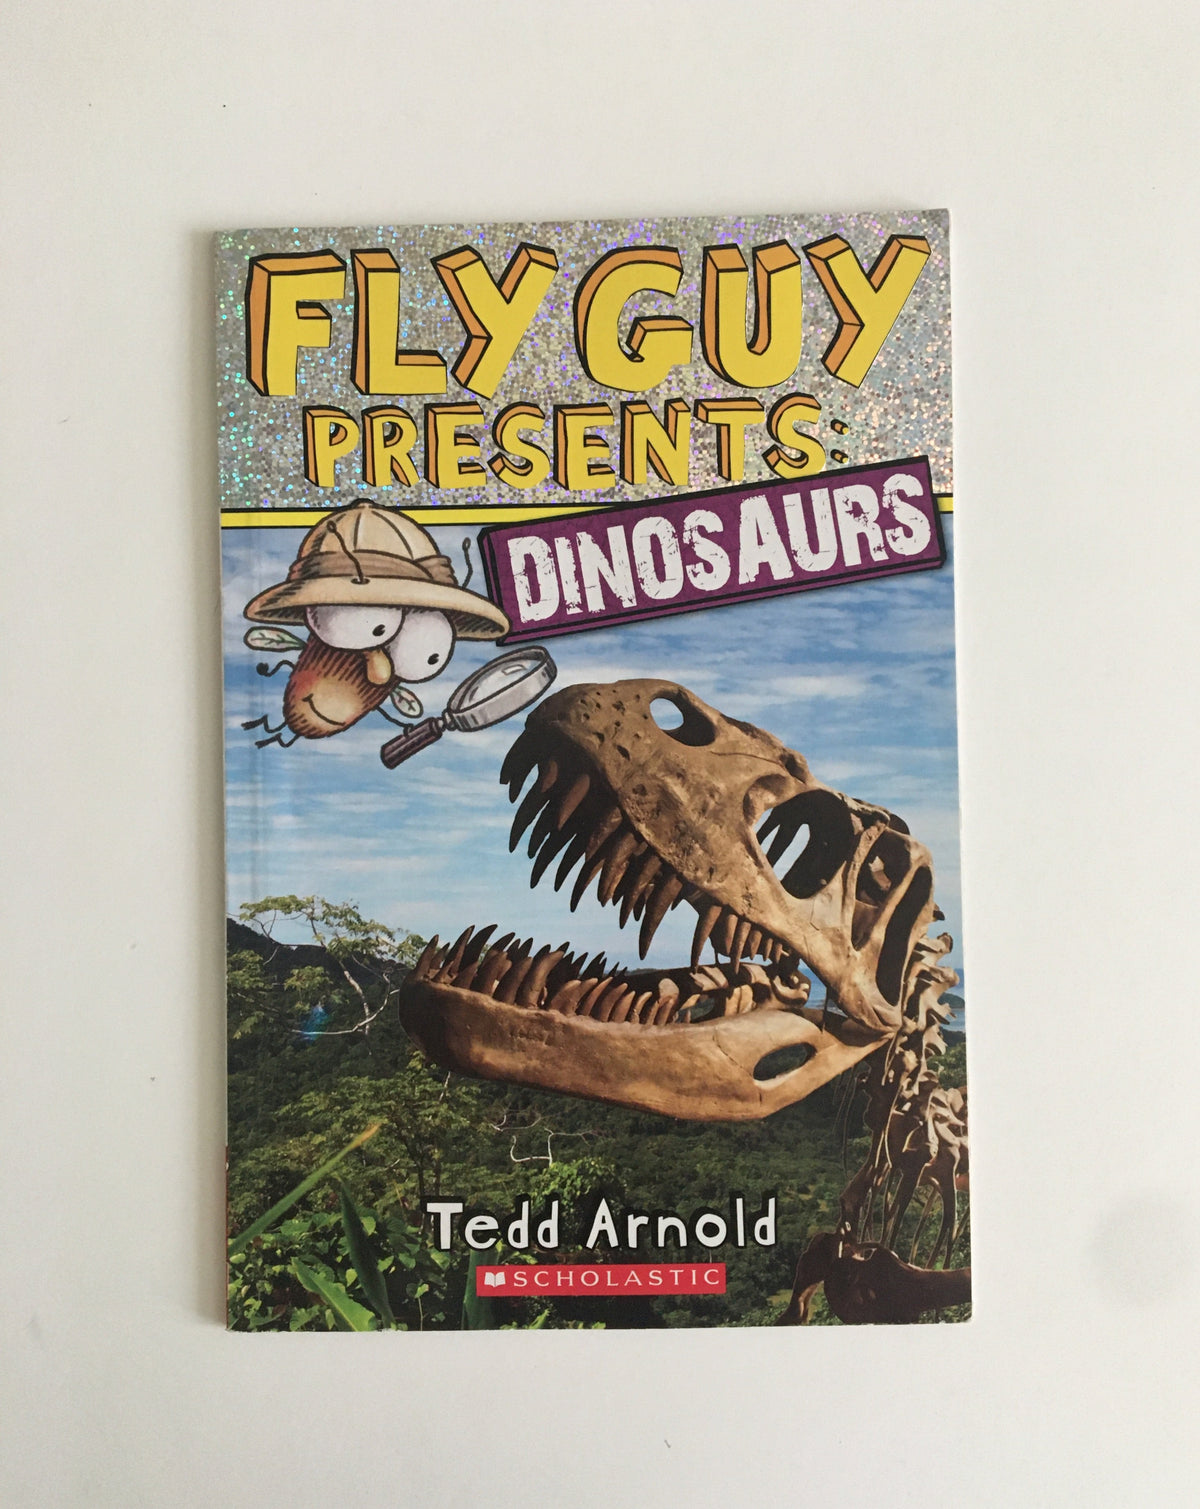 Fly Guy Presents: Dinosaurs by Tedd Arnold